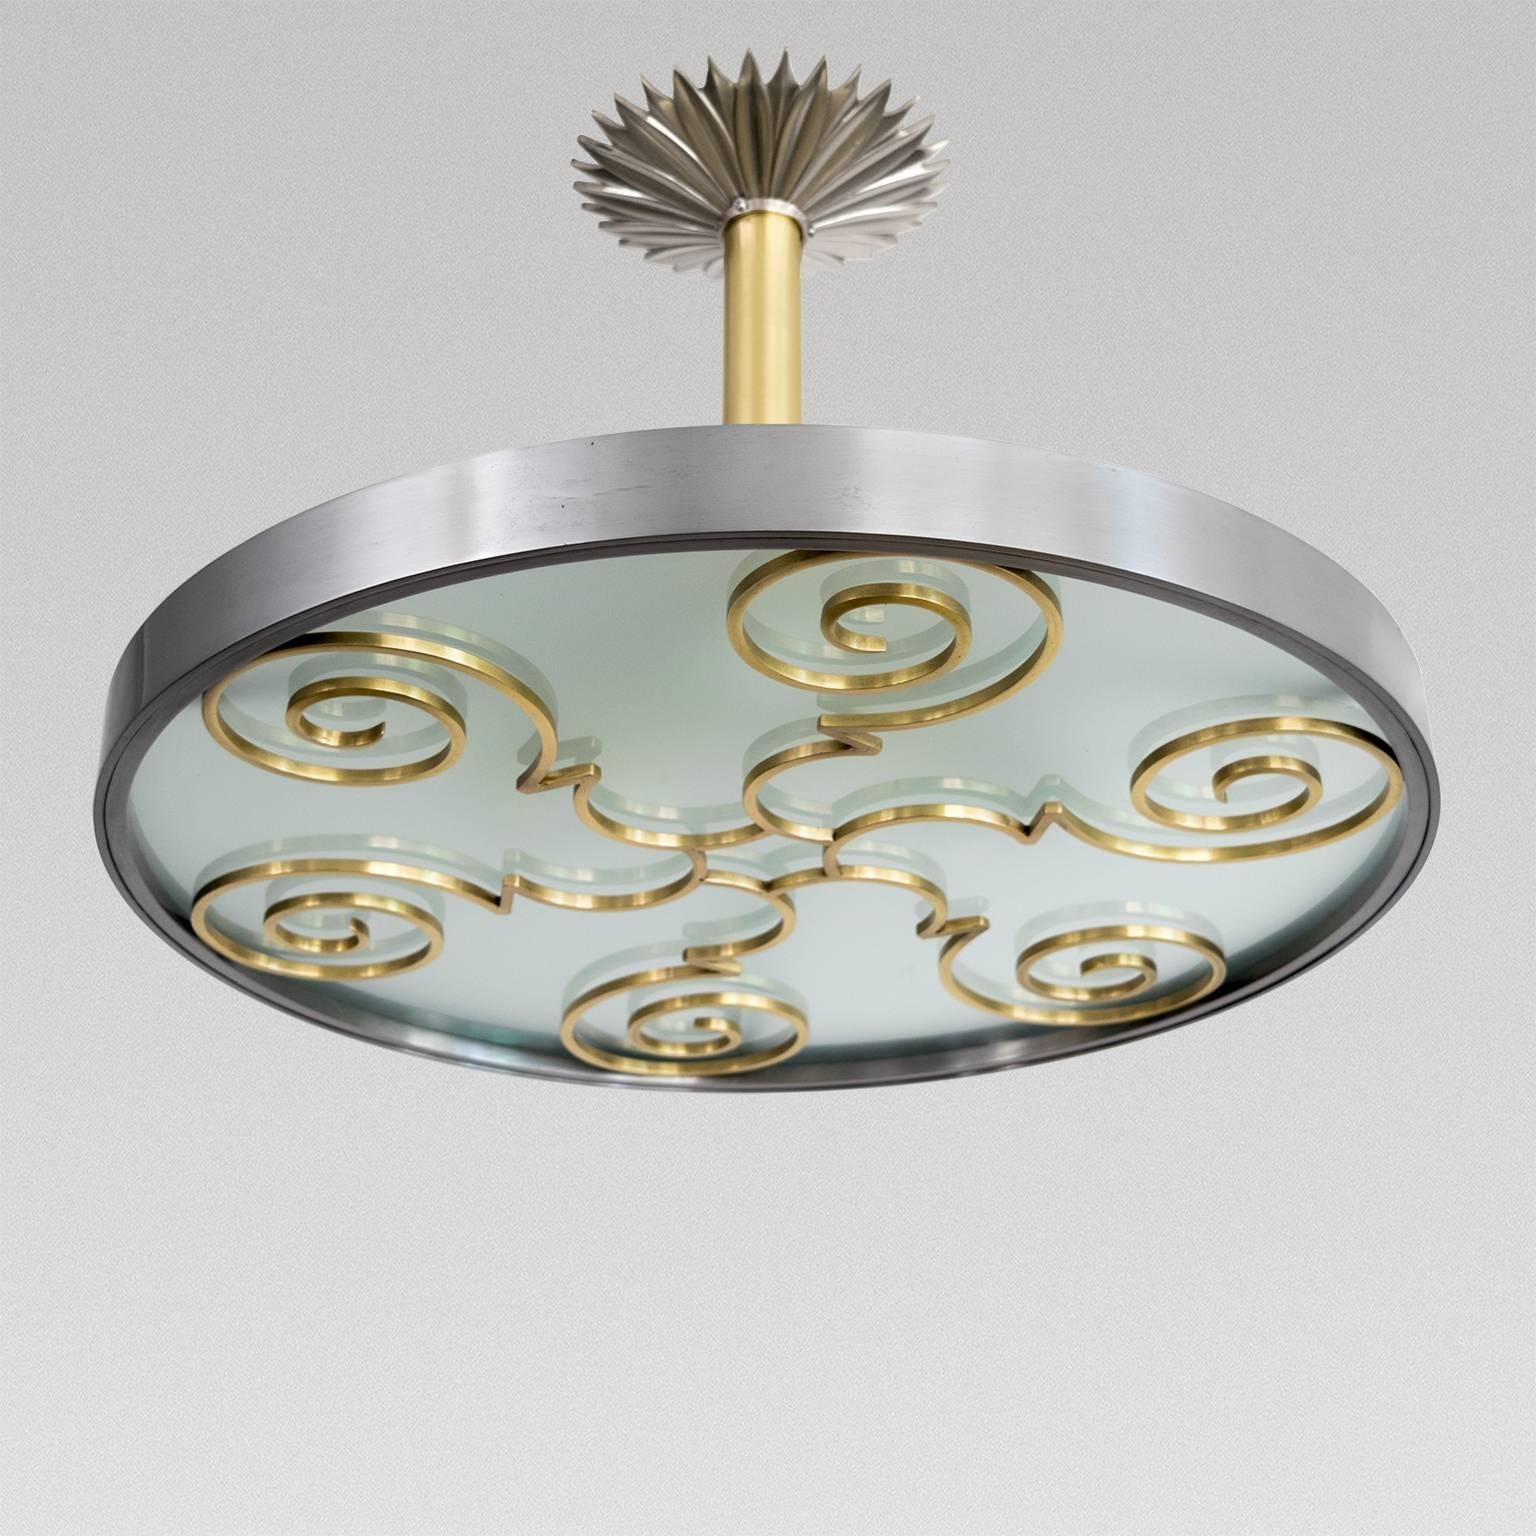 Scandinavian Modern light fixture in polished steel, brass and glass by Lars Holmstrom, Sweden, circa 1930-1940. Made at Holmström's Arvika Studio with impressed marks. Newly rewired with three standard base sockets.
